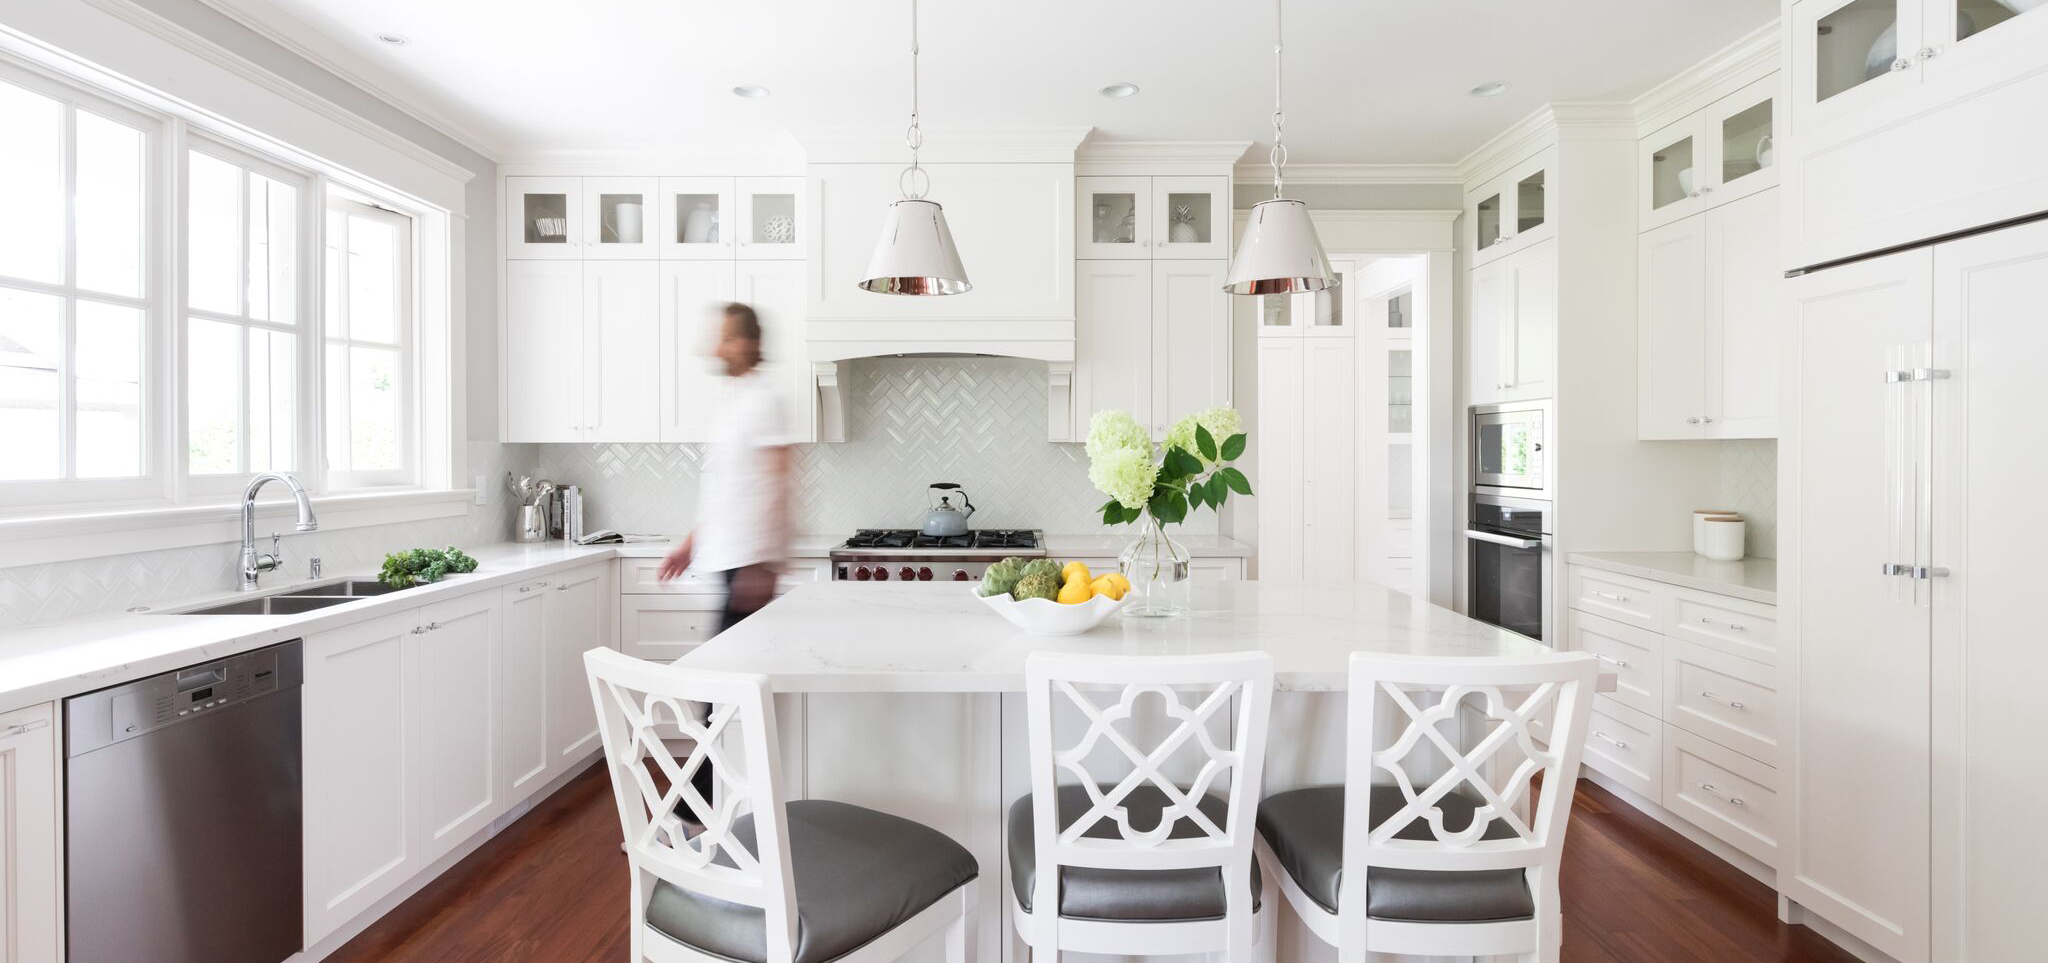 All white kitchen with a center aisle